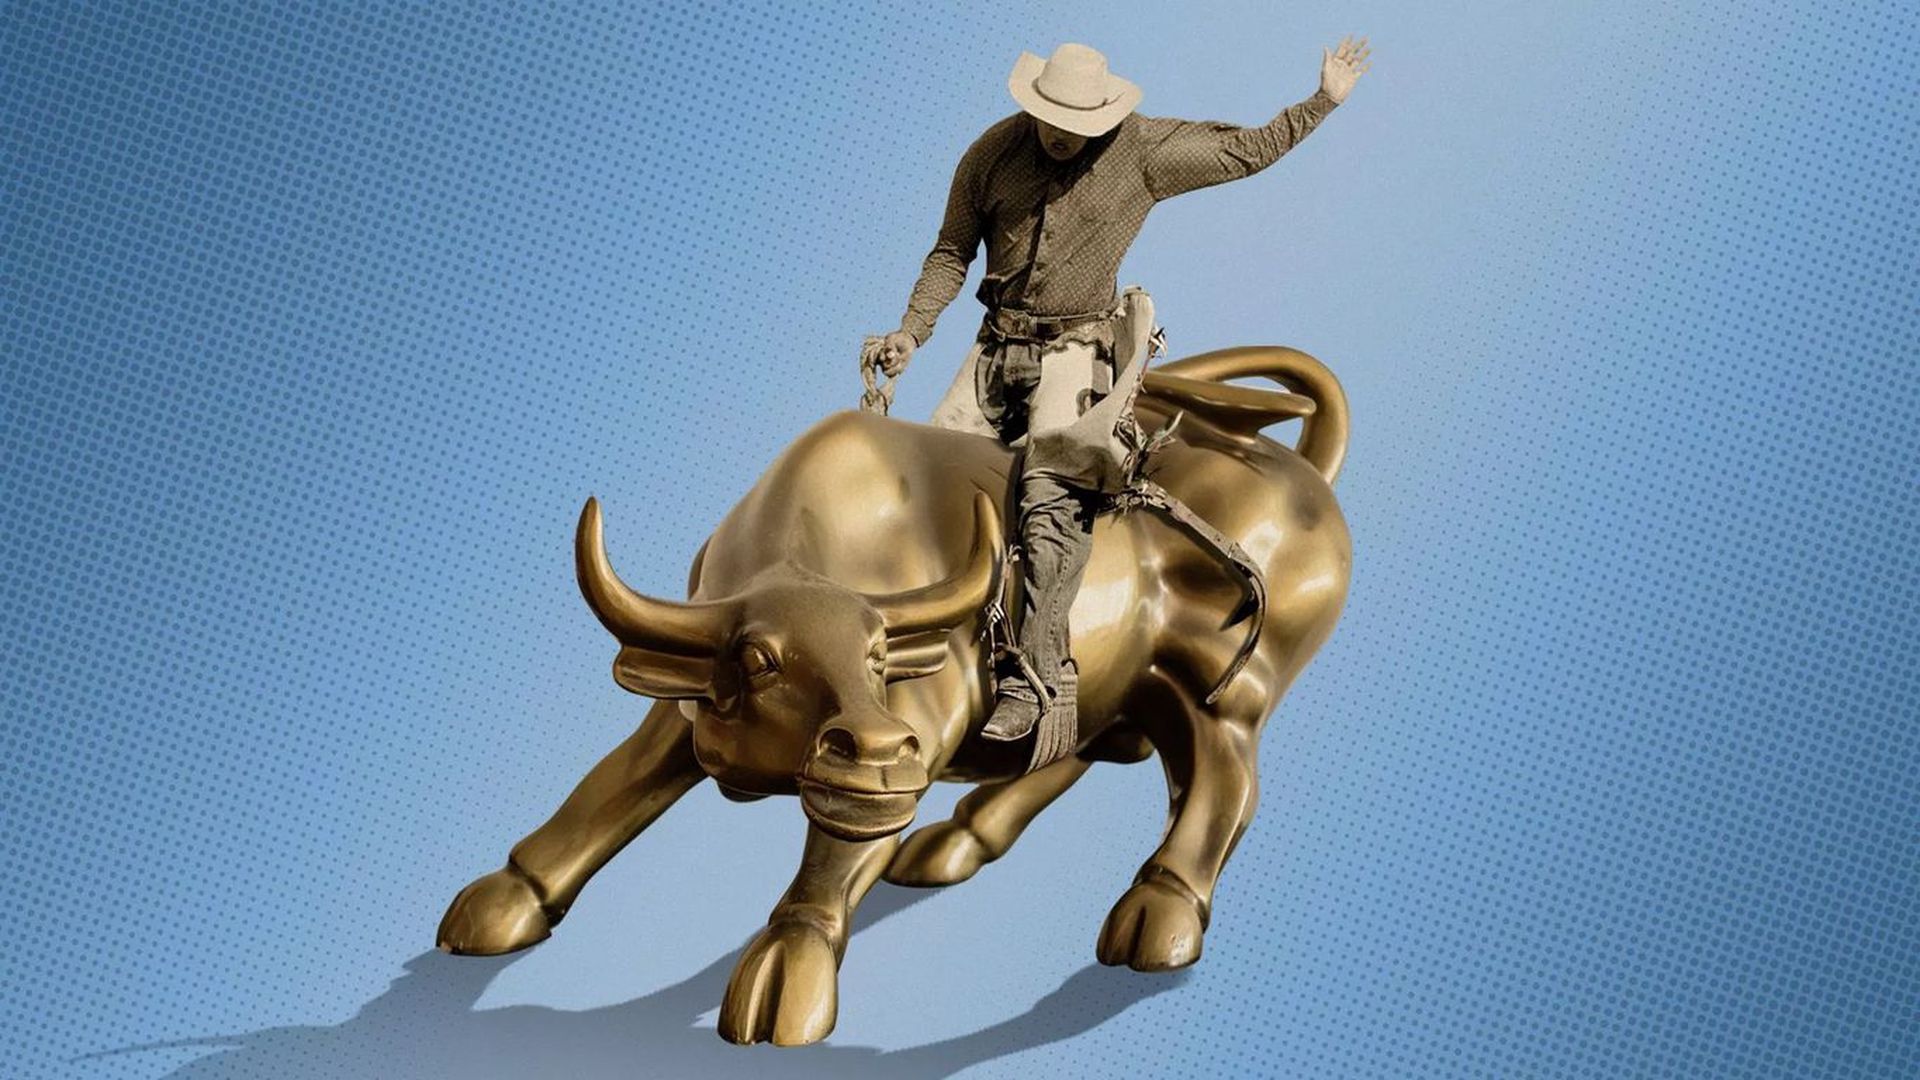 The bull market statue with someone riding it 